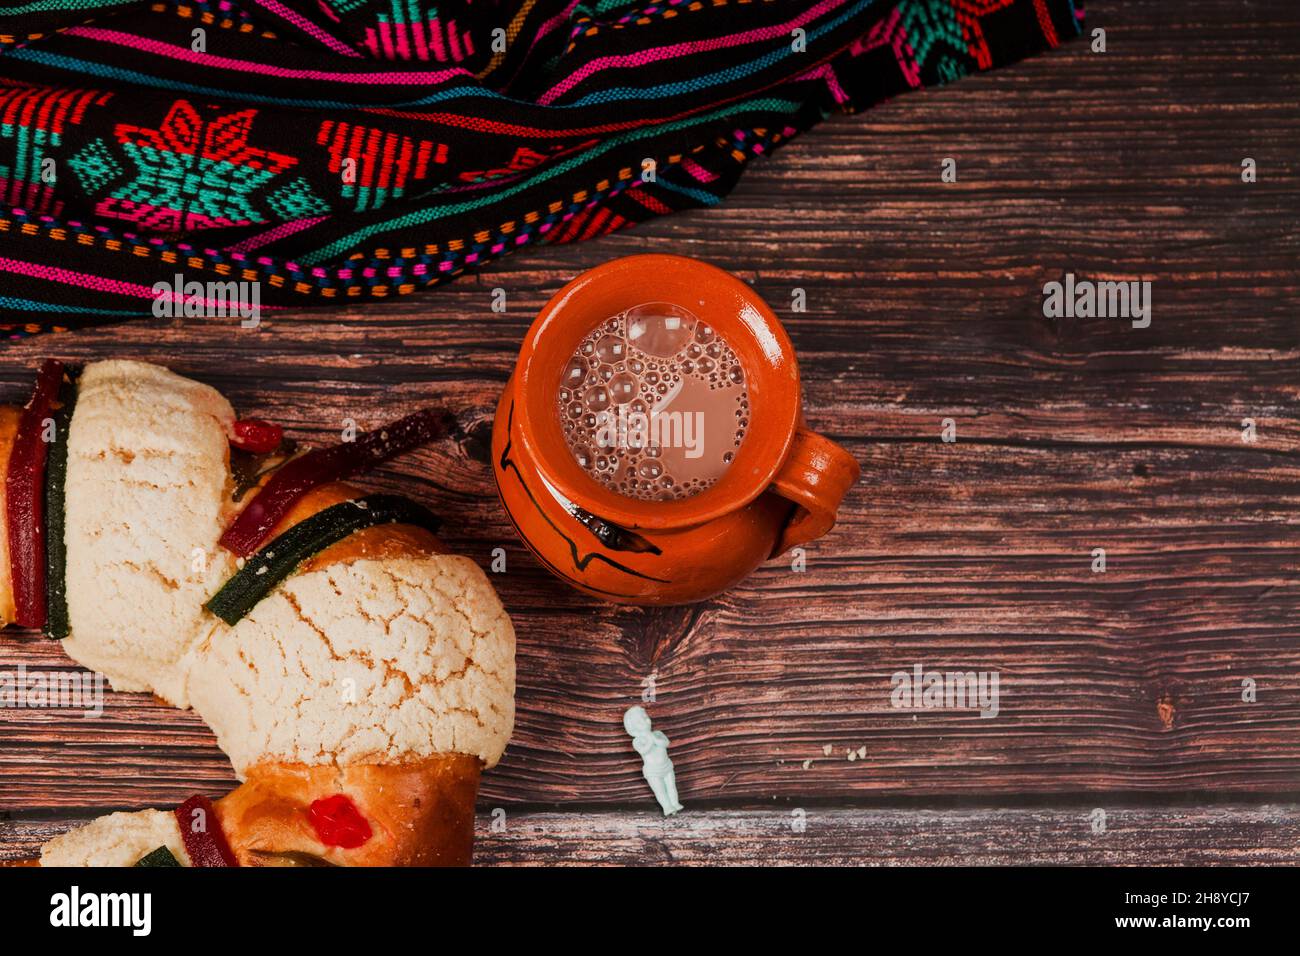 Rosca de reyes or Epiphany cake and clay mug of mexican hot chocolate on wooden table in Mexico Latin America Stock Photo